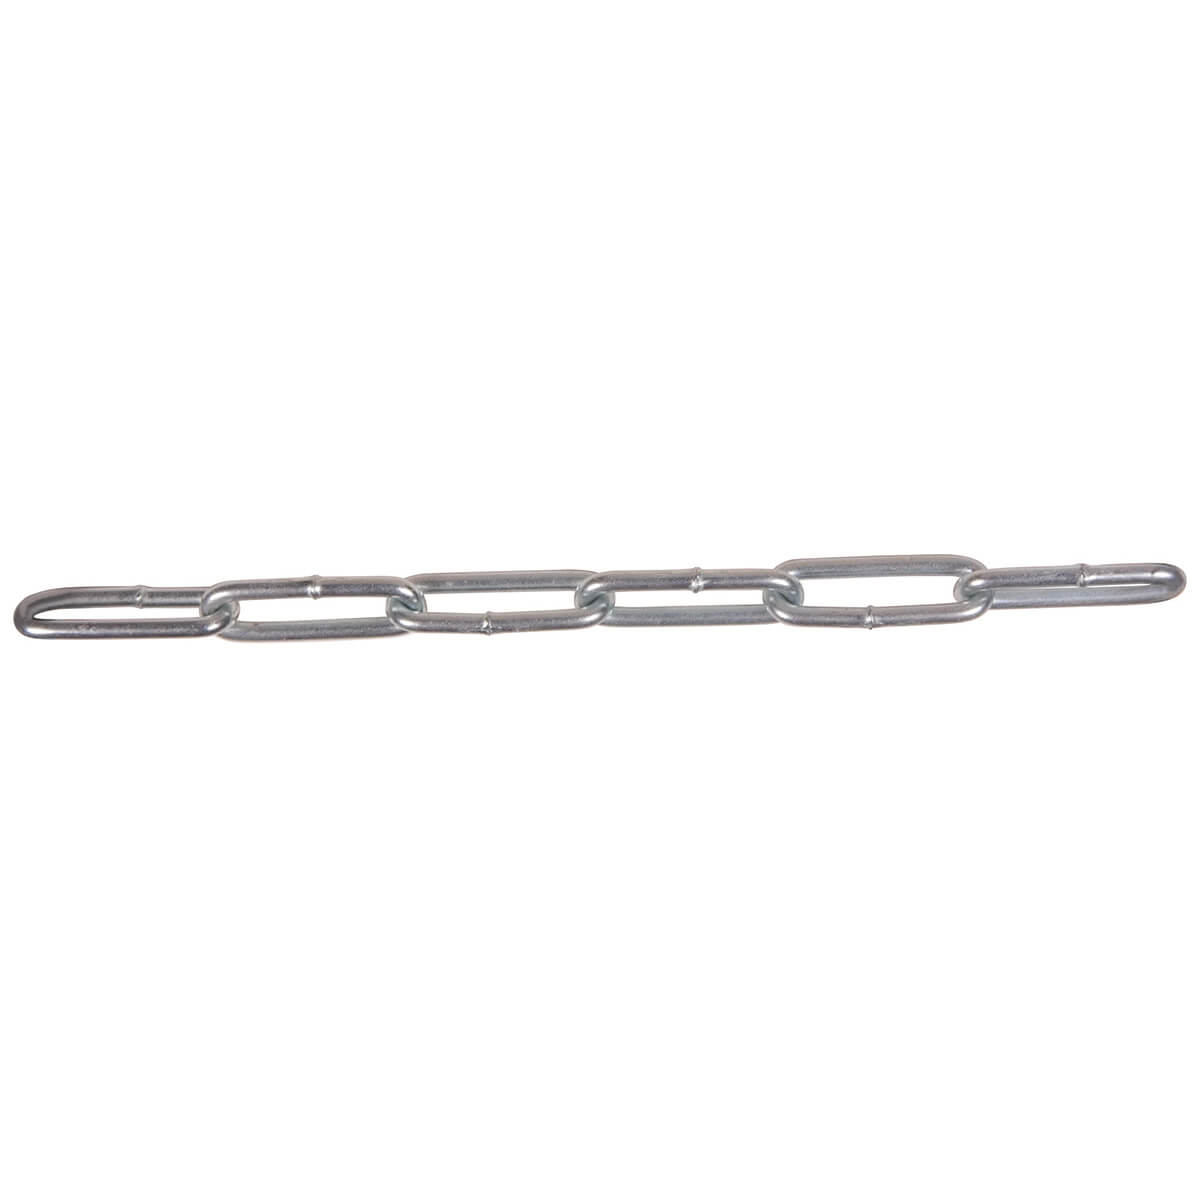 Coil Chain - Low Carbon Steel - Straight Link